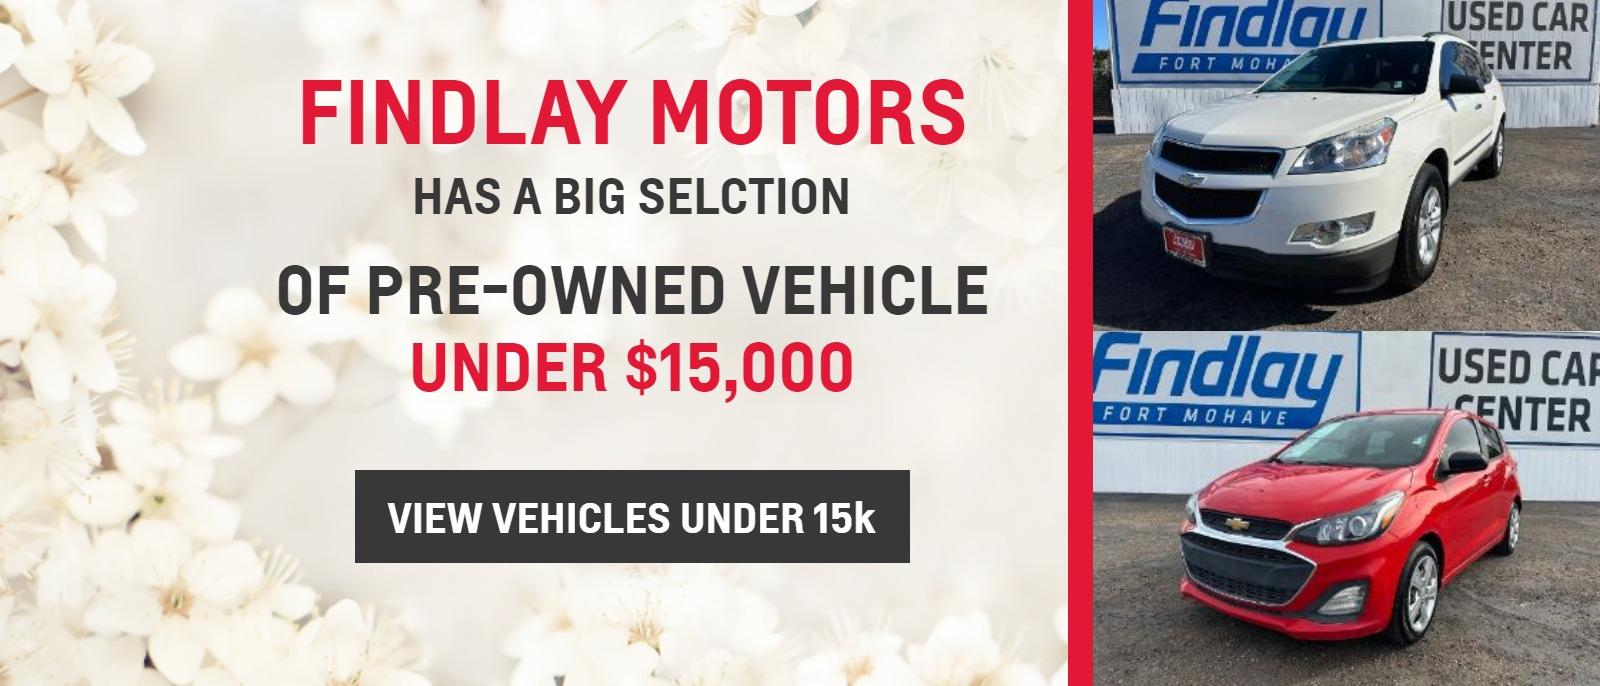 FINDLAY MOTORS
HAS A BIG SELCTION
OF PRE-OWNED VEHICLE UNDER $15,000